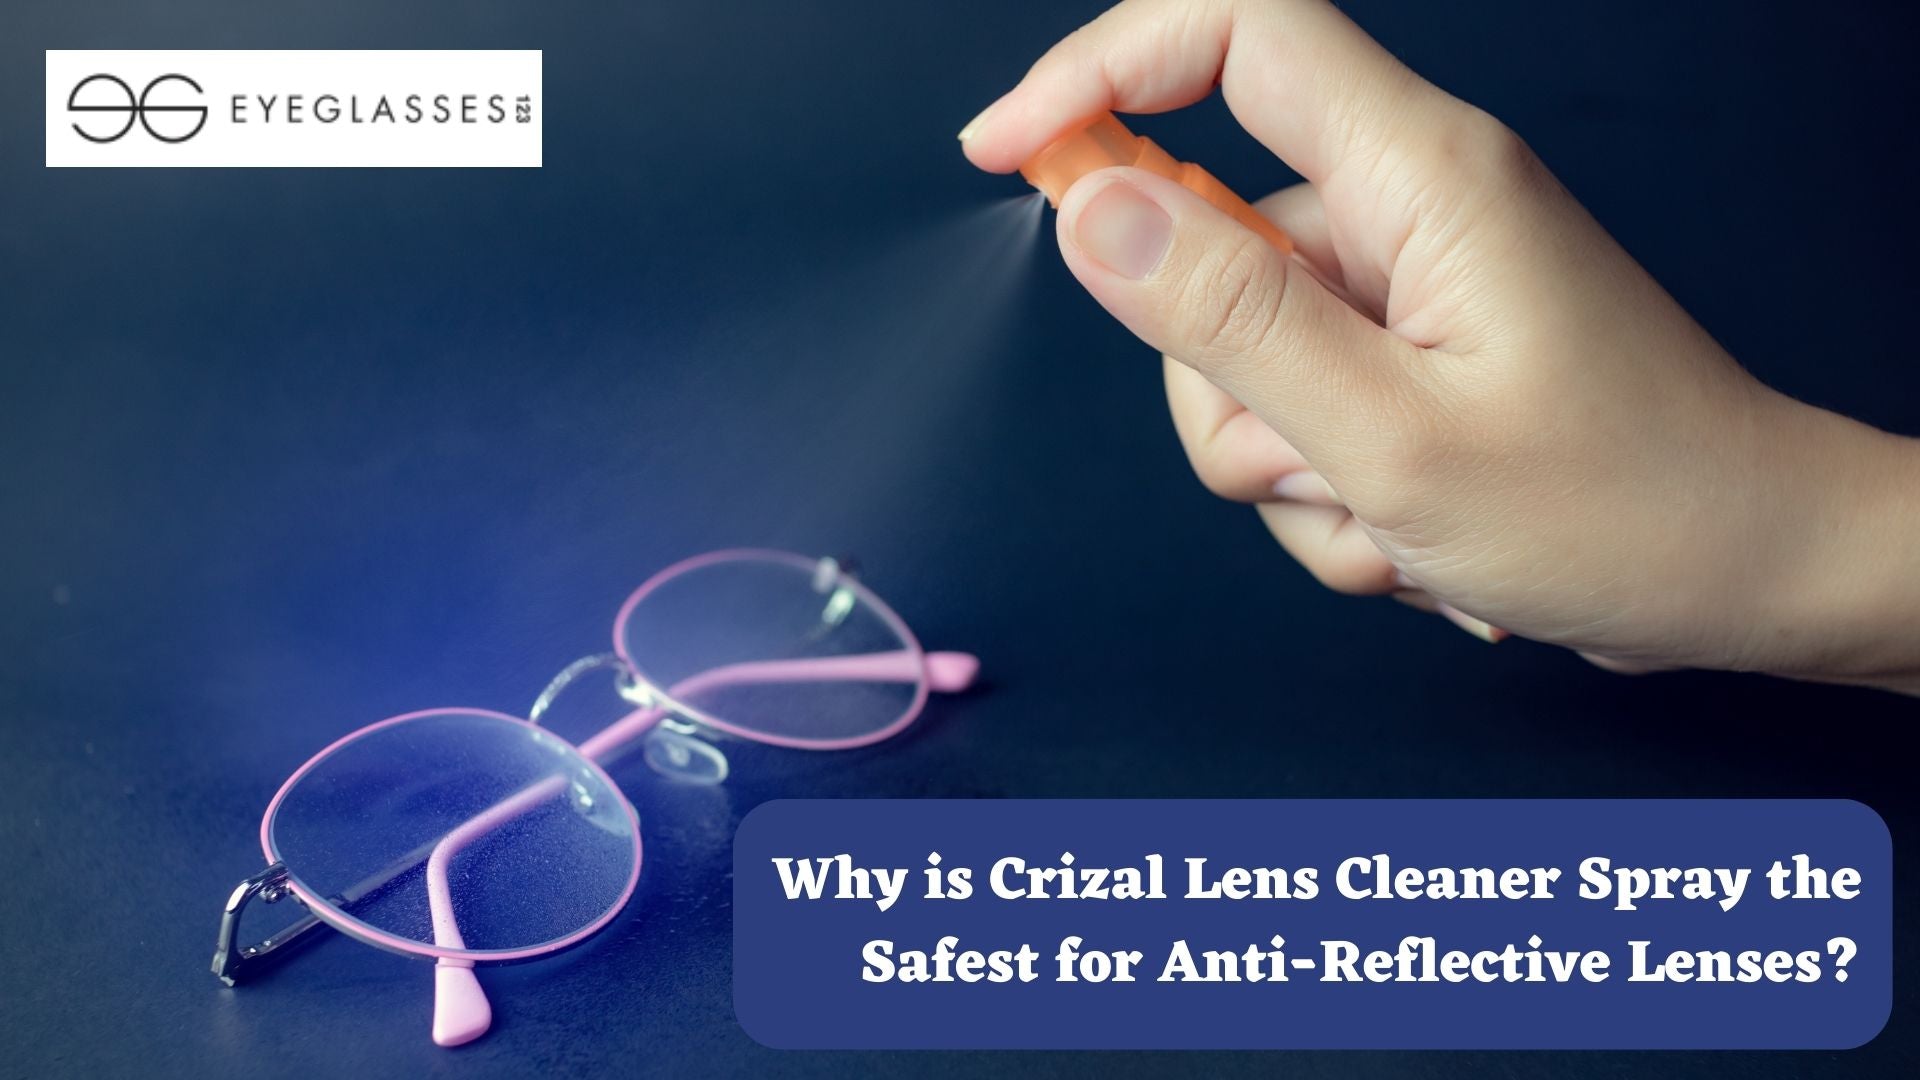 Why is Crizal Lens Cleaner Spray the Safest for Anti-Reflective Lenses?